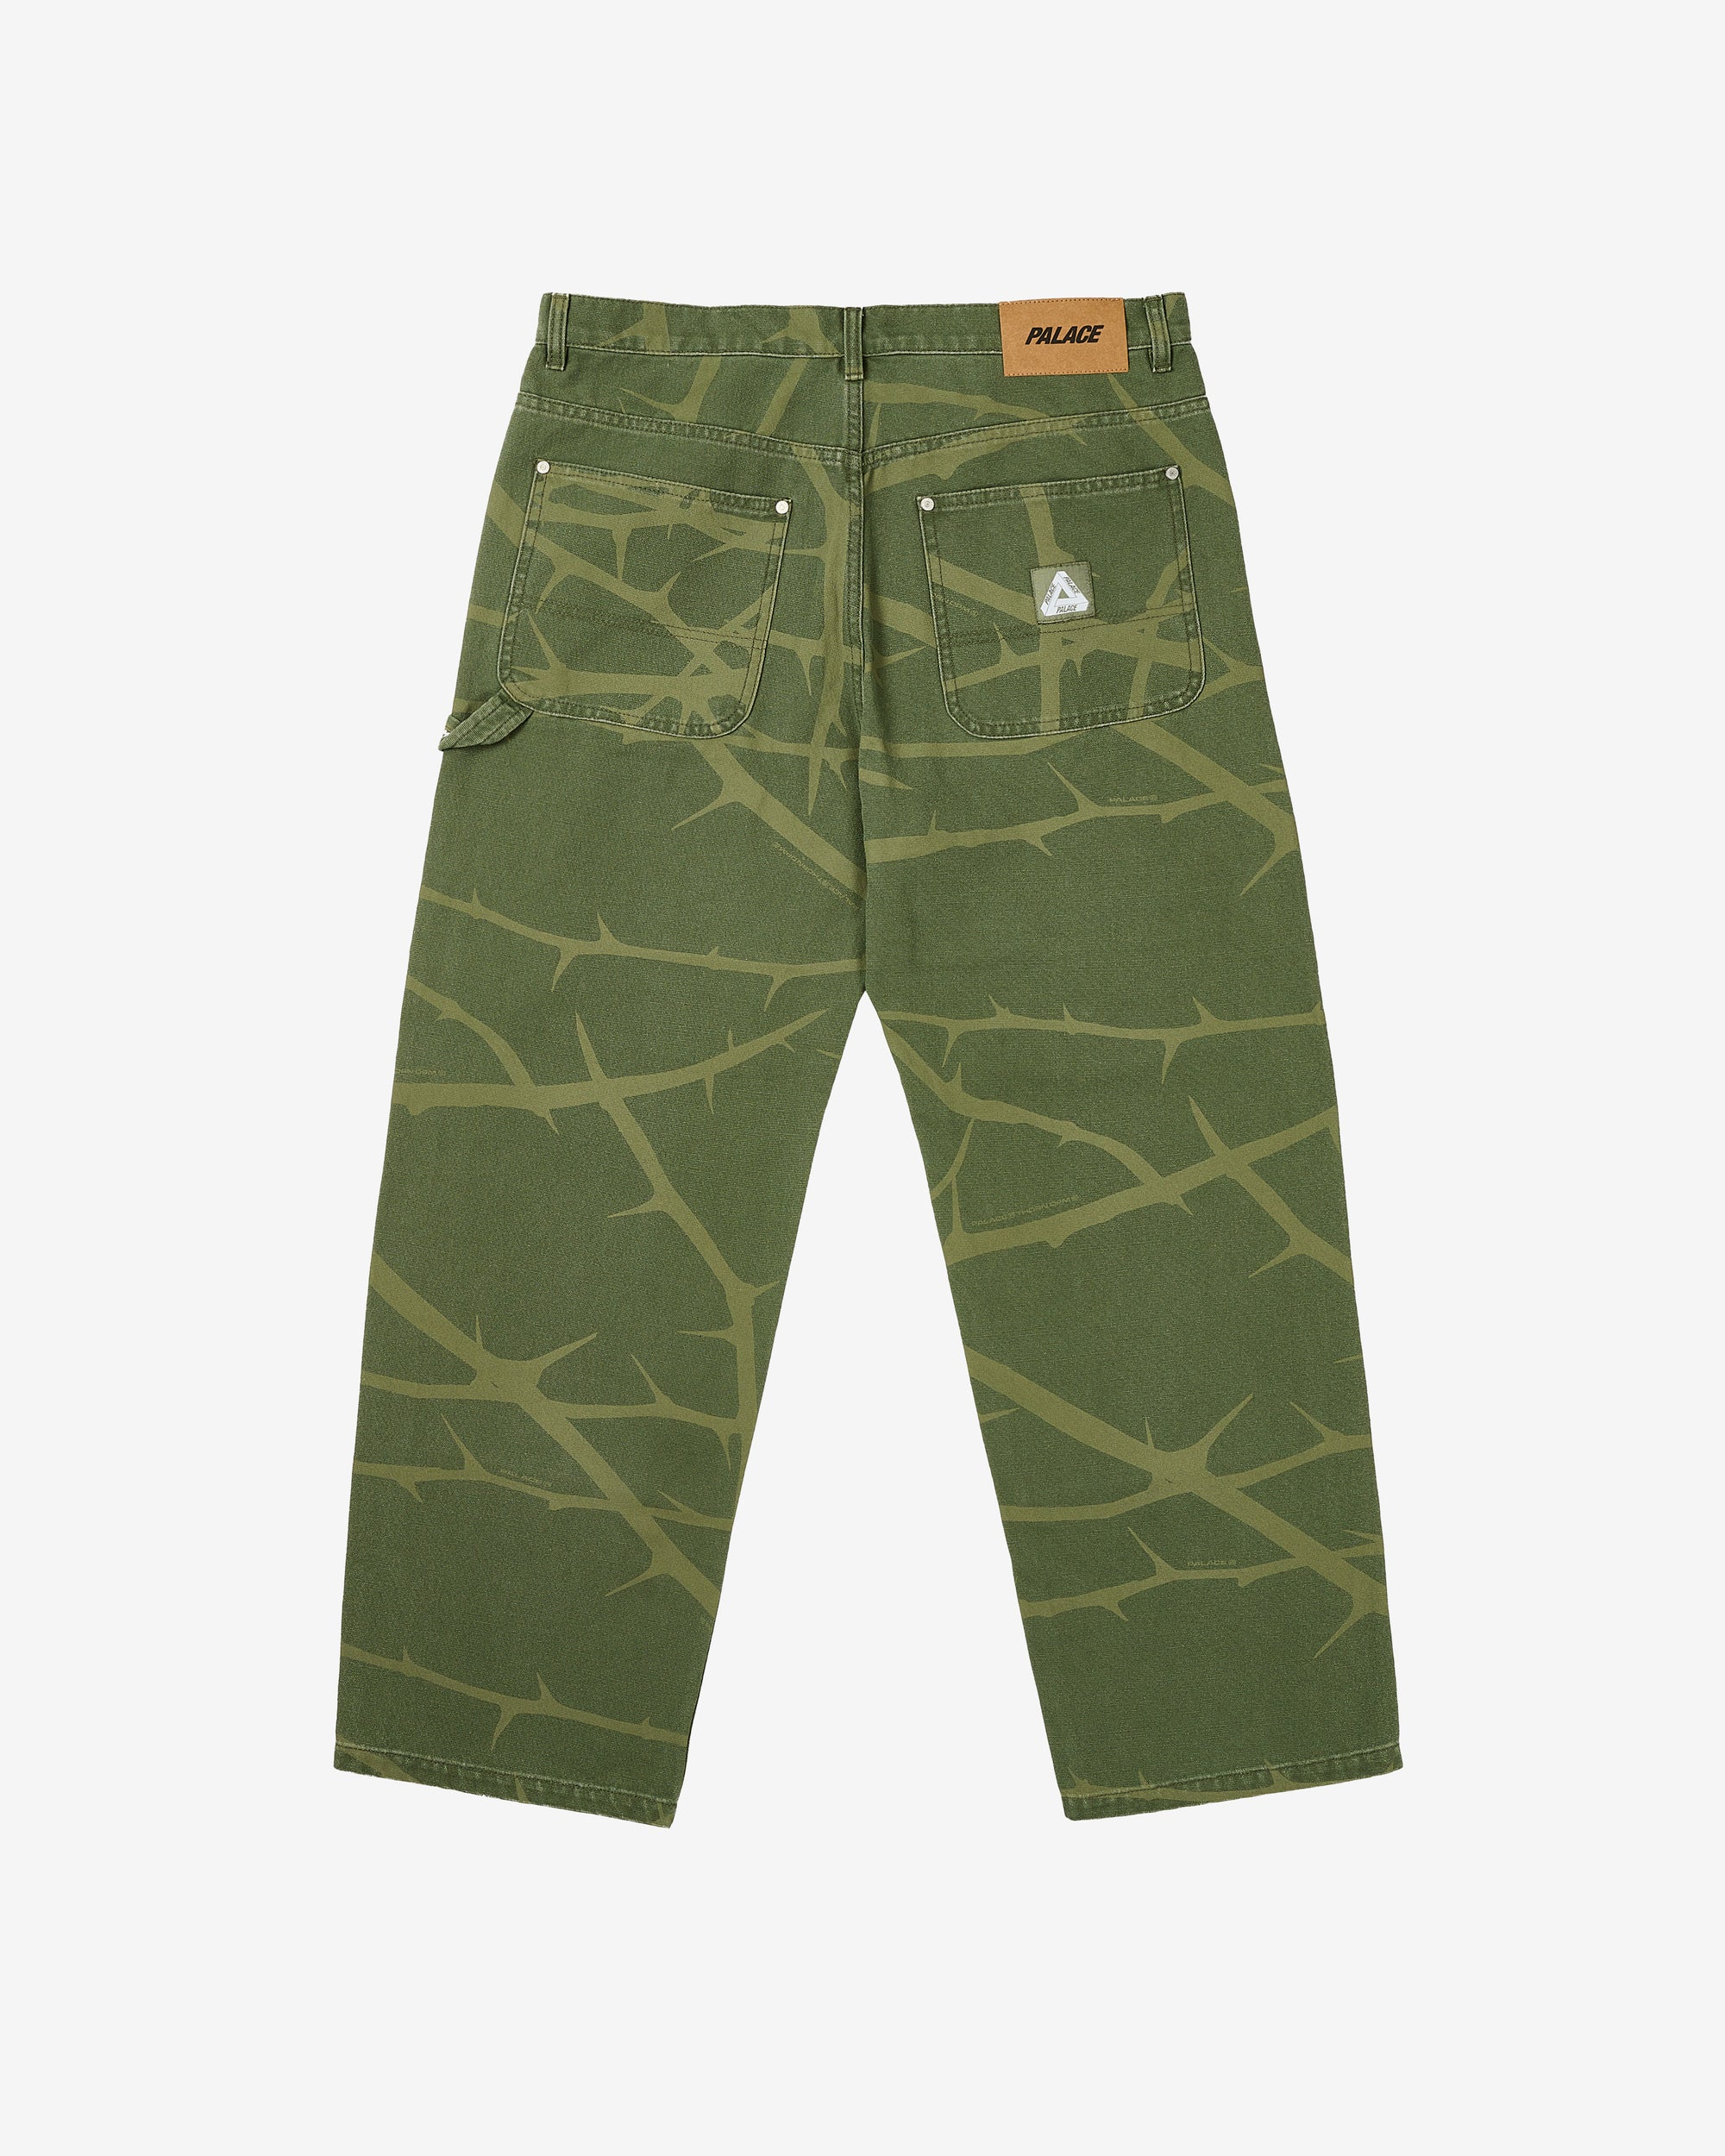 Palace - Men's Heavy Canvas Work Pant - (The Deep) view 2